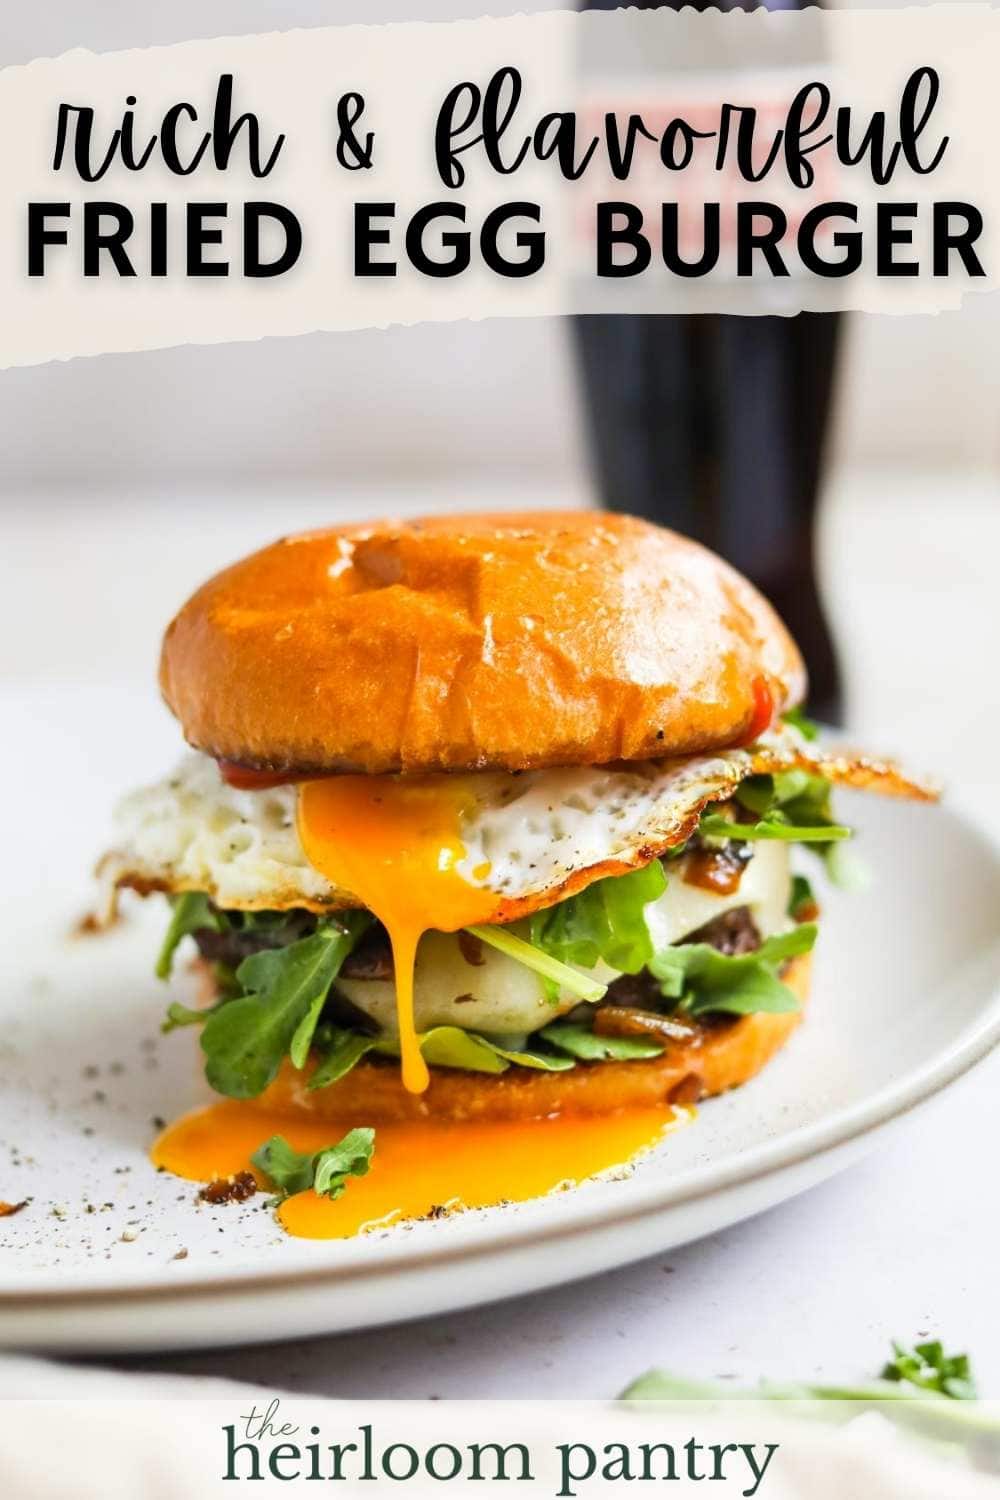 Pinterest pin of fried egg cheeseburger with yolky egg, arugula, and grilled onions on a plate.